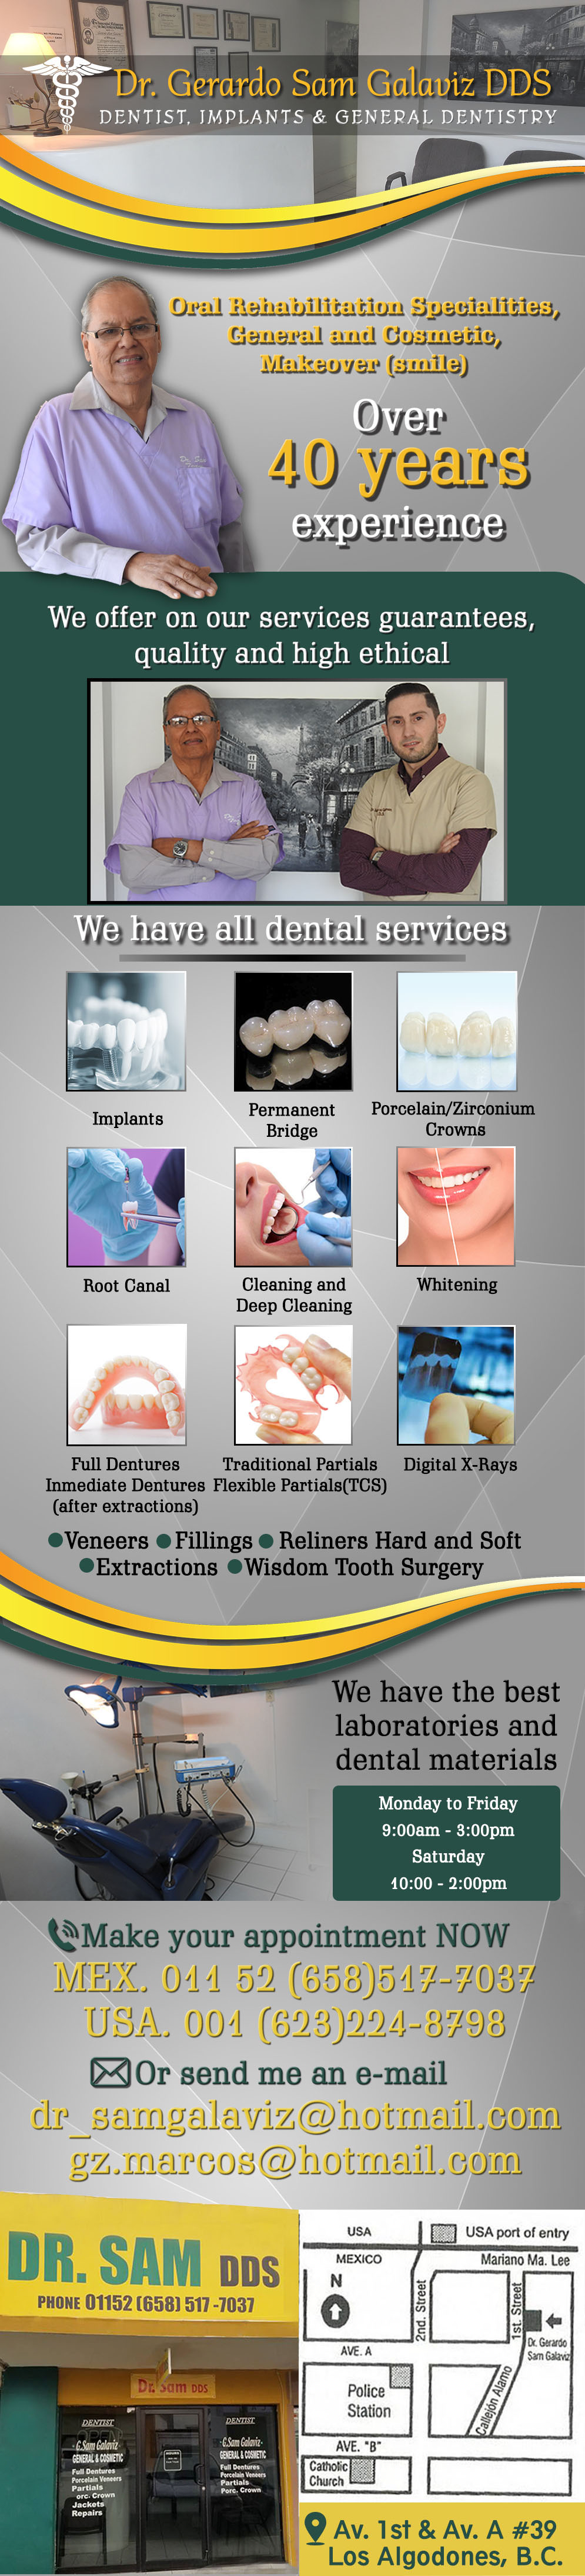 Dentist Gerardo Sam Galaviz D.D.S.-We offer on our services guarantees, quality and high ethical. Implants, Porcelain Crowns, Zirconium Crowns, Veneers, Permanent Bridge, Full Dentures, Inmediate Dentures(After Extractions), Reliners Hard and Soft, Traditional Partials (TCS), Extractions, Wisdom Tooth Surgery, Root Canals, Fillings, Whitening, Cleaning and Deep Cleaning, Digital X-Rays.                